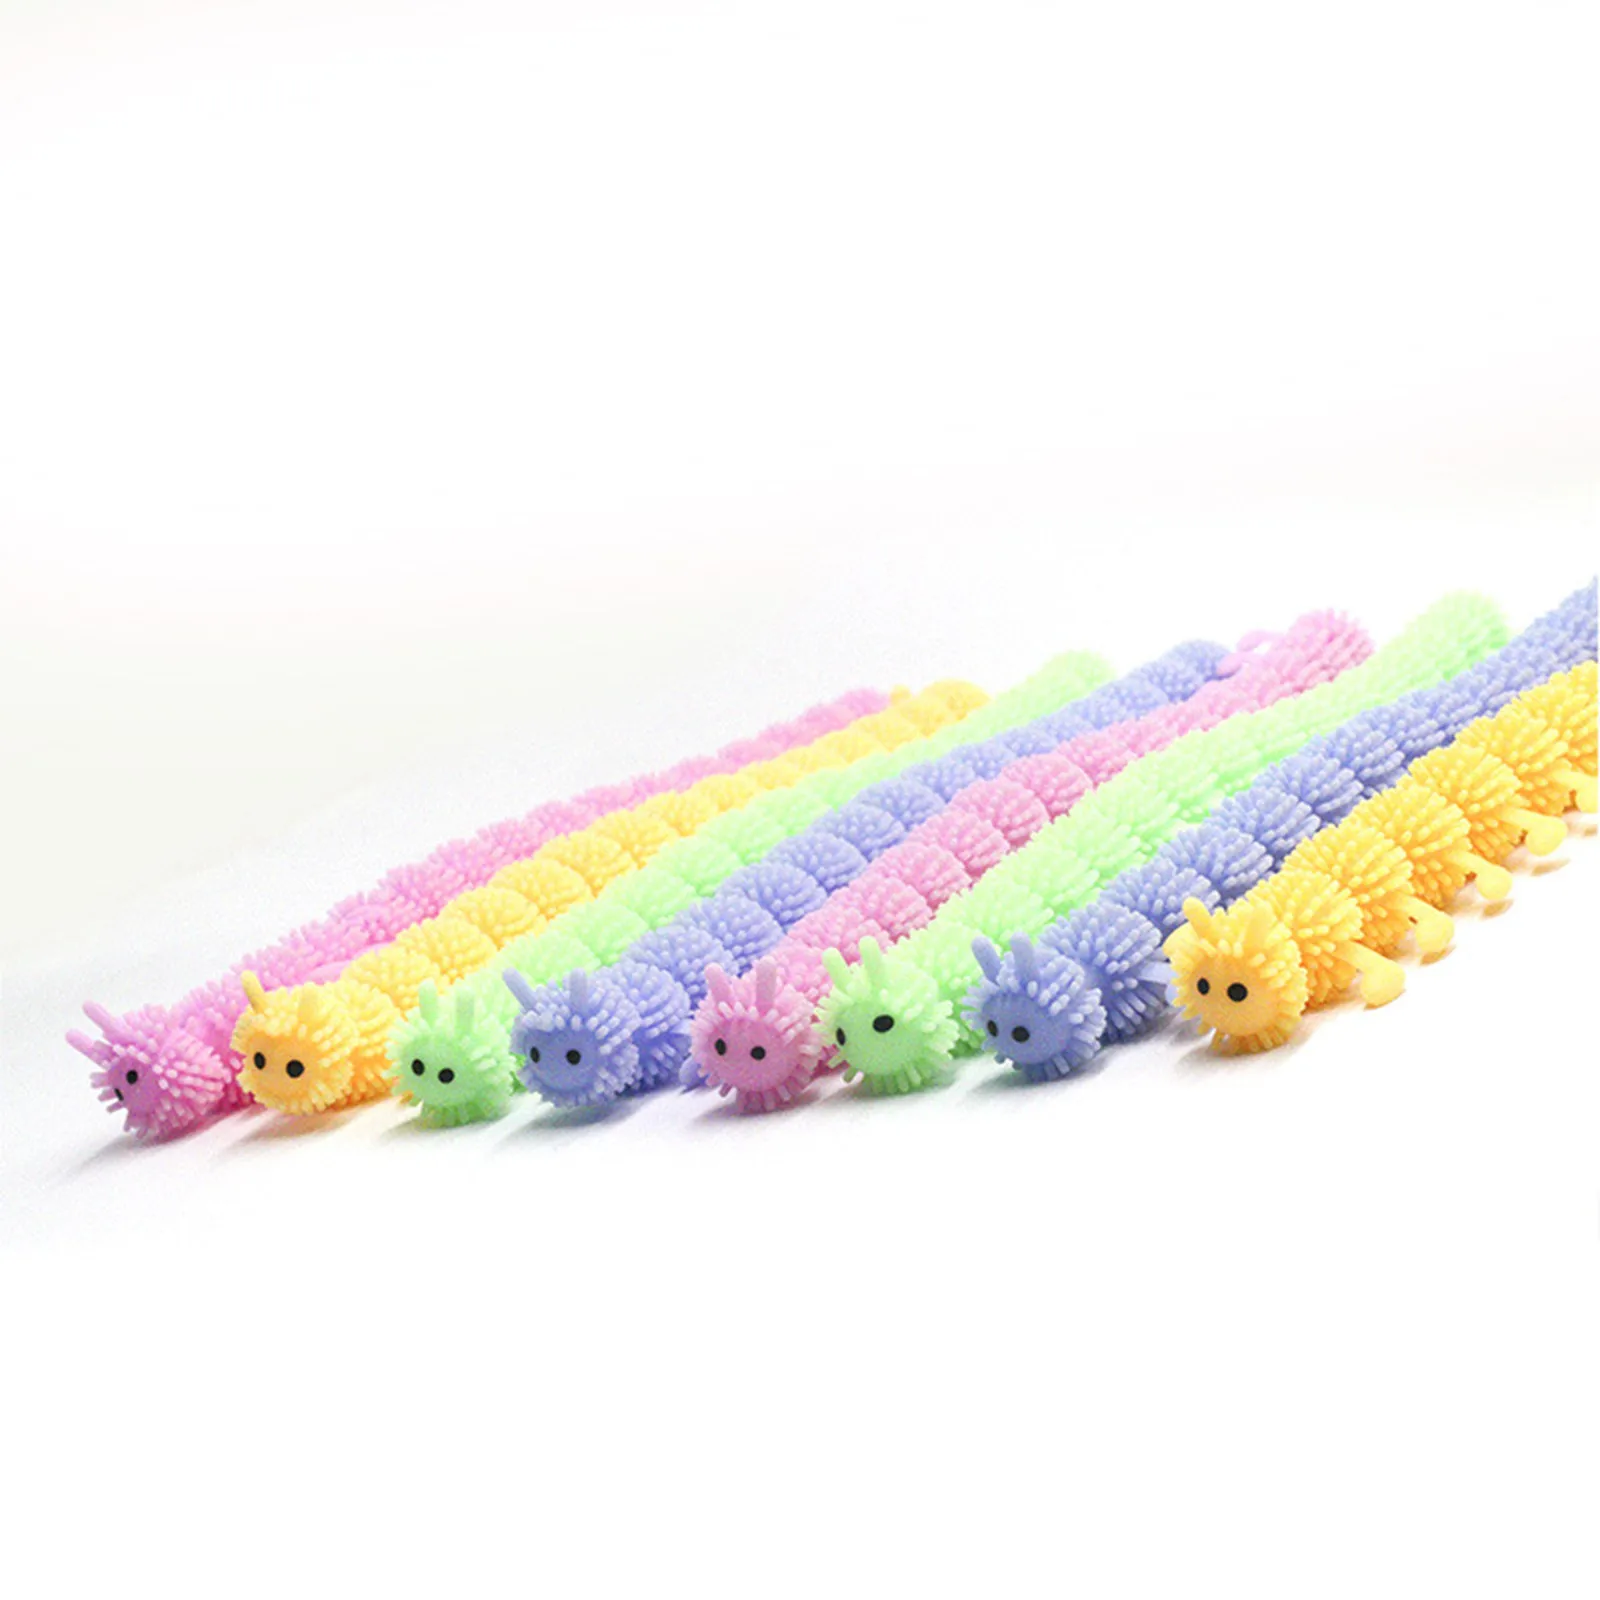 Relieve Pressure can Fall can Squeeze Suitable for Children Over 3 Years Old to Play 16 Knots Caterpillar Relieves Stress Toy Physiotherapy Releases Stress,to Relieve Pressure Pink 